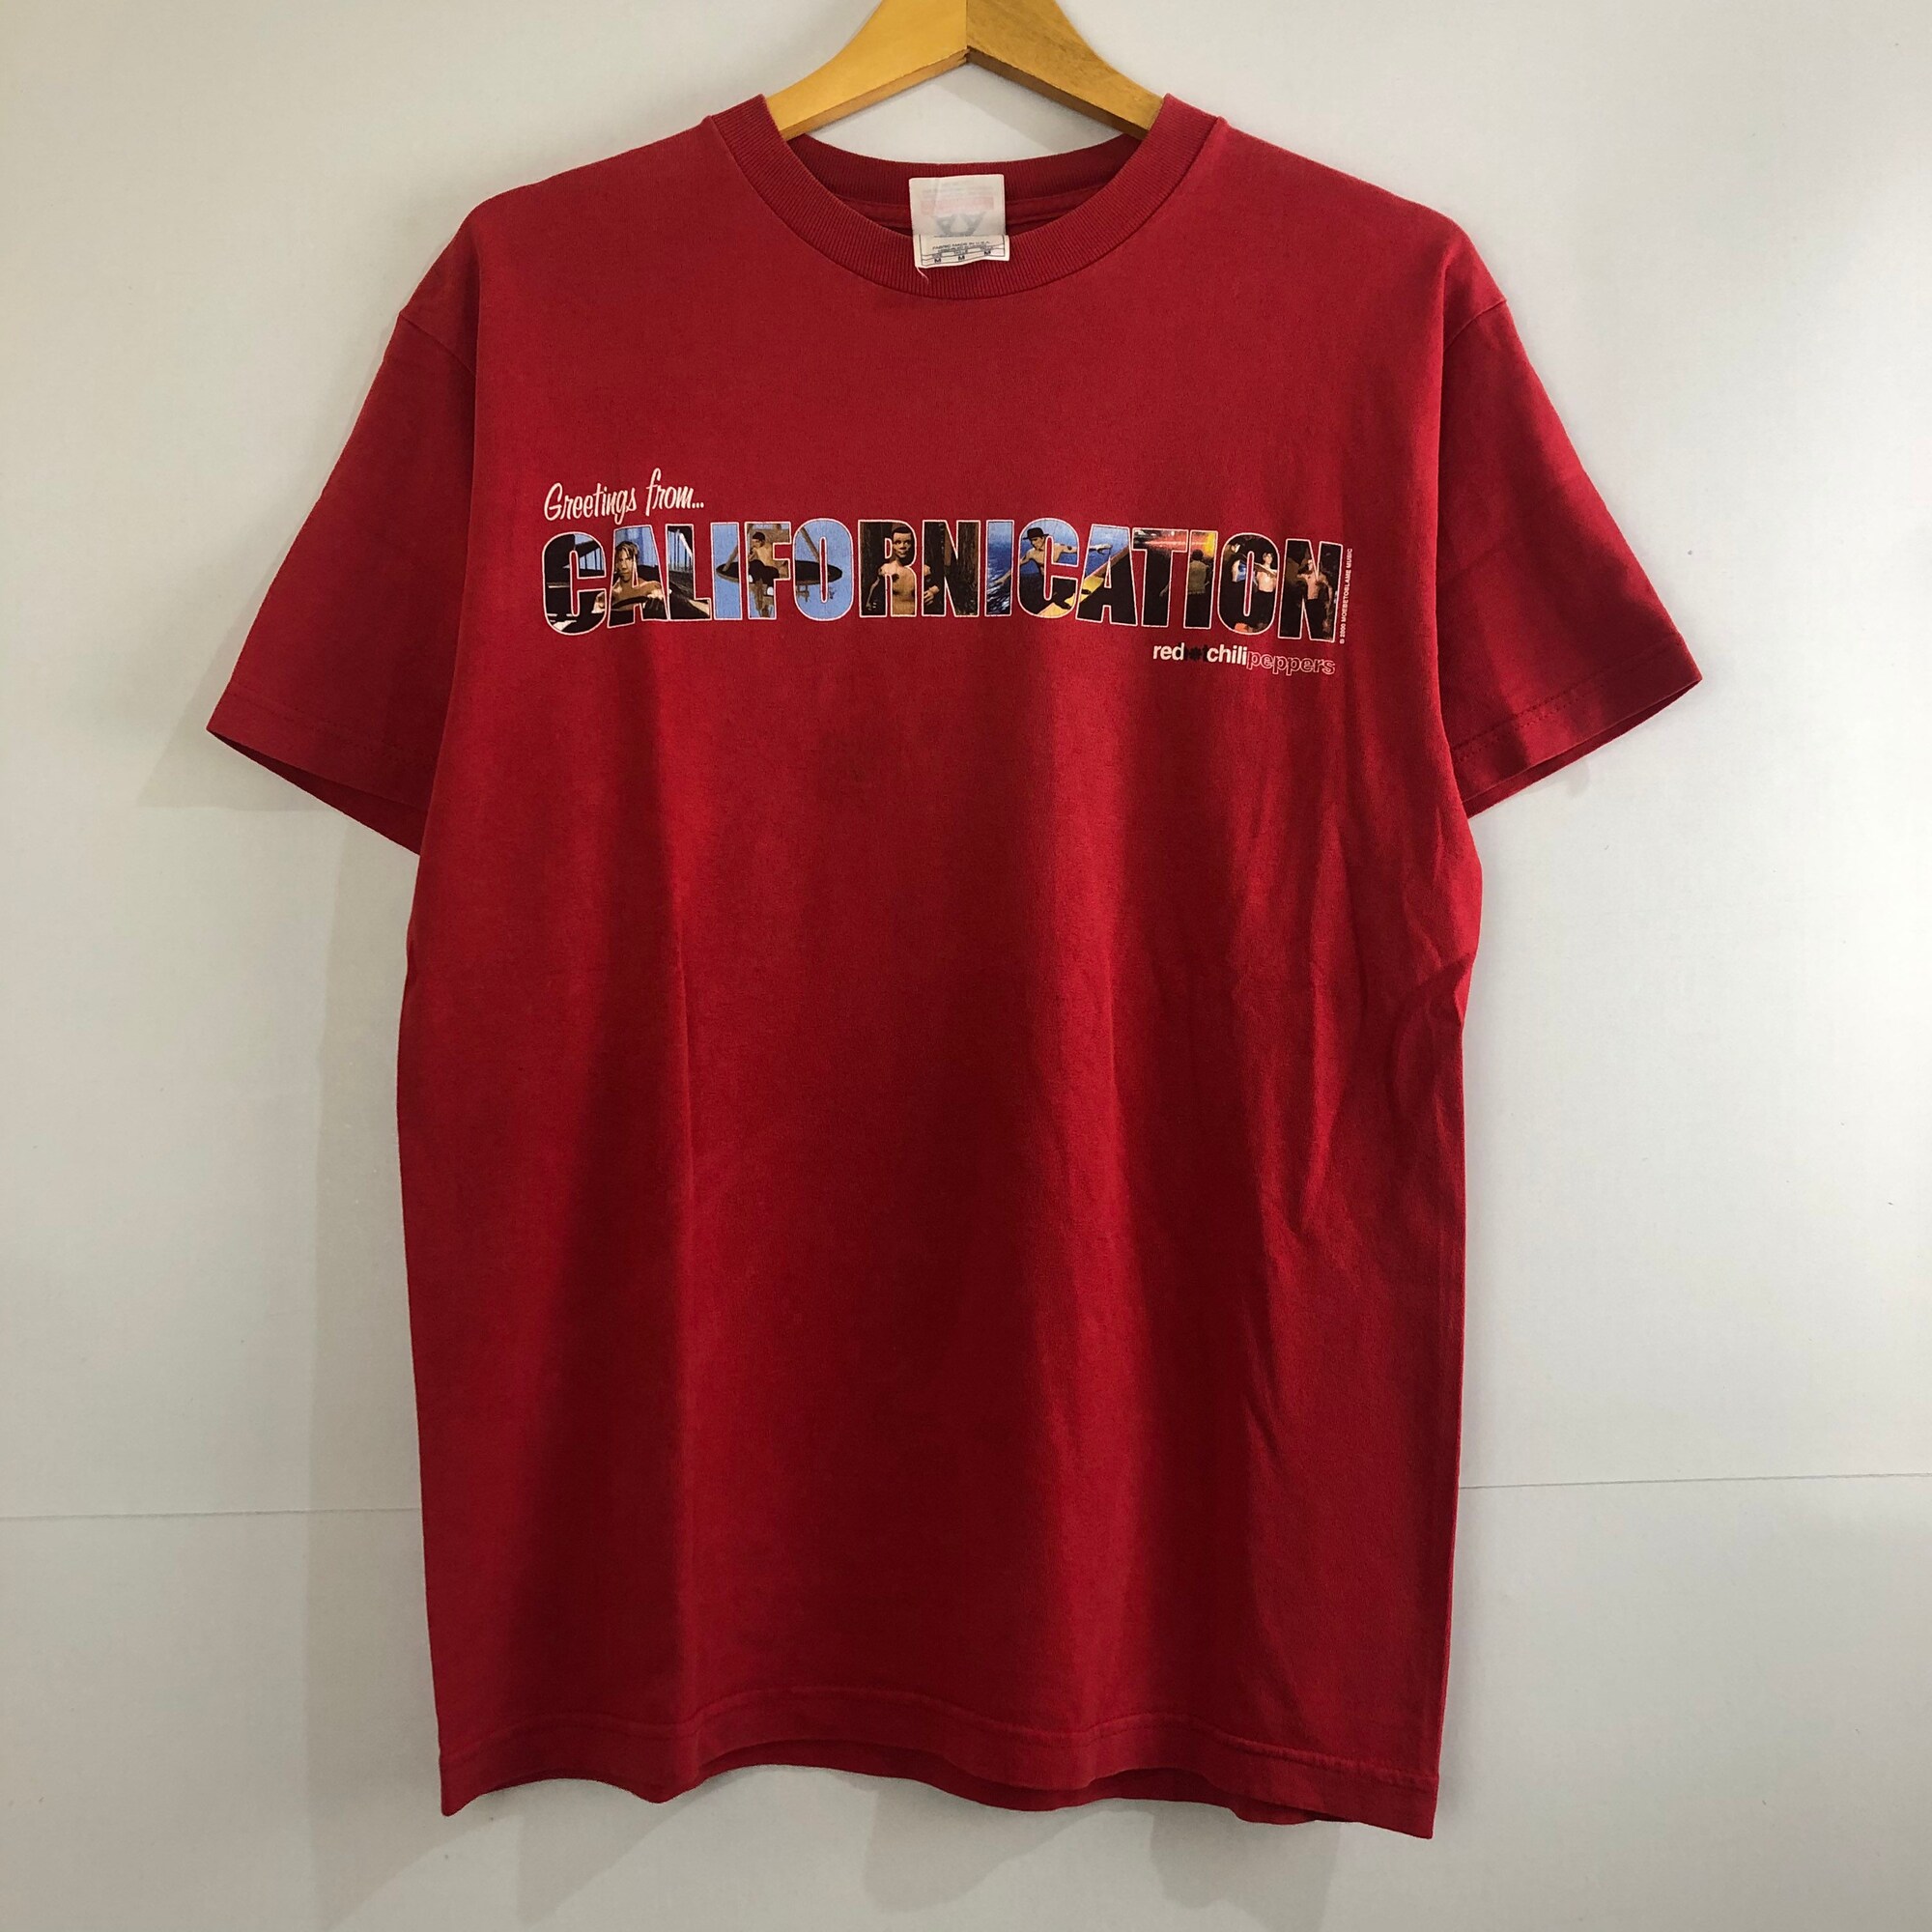 Vintage Red Hot Chili Peppers T-Shirt